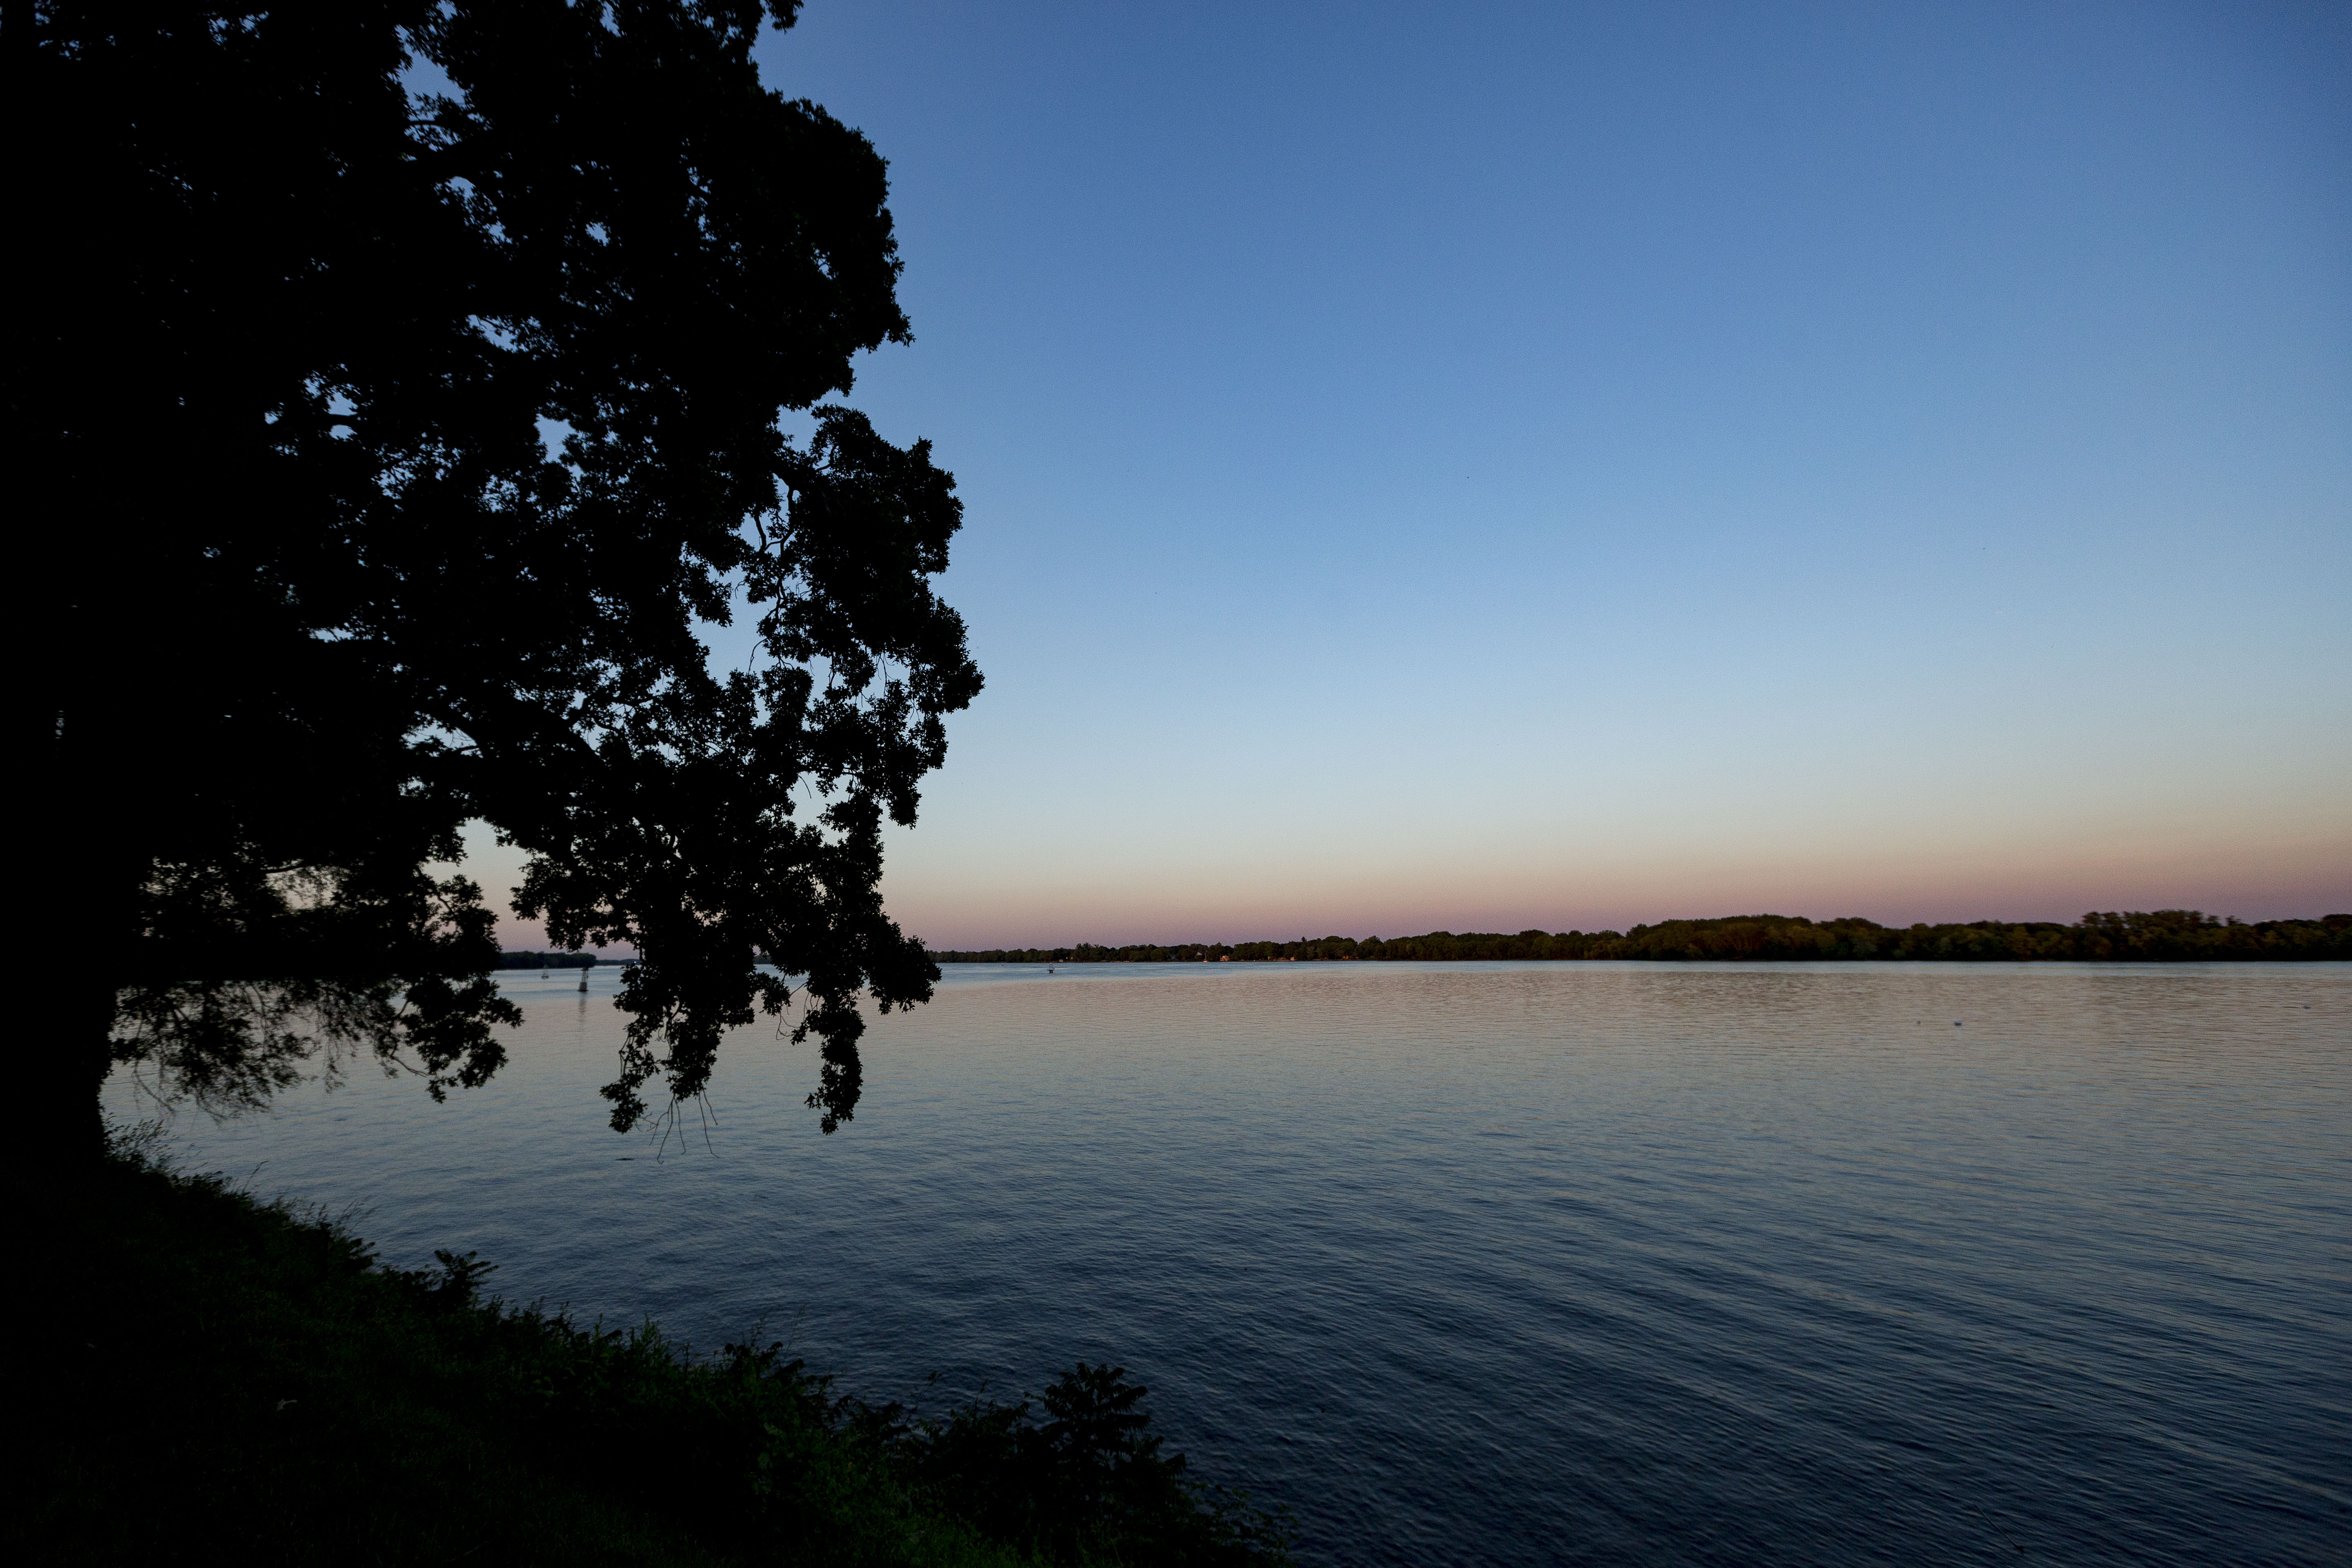 A view over the Delaware River at dusk.